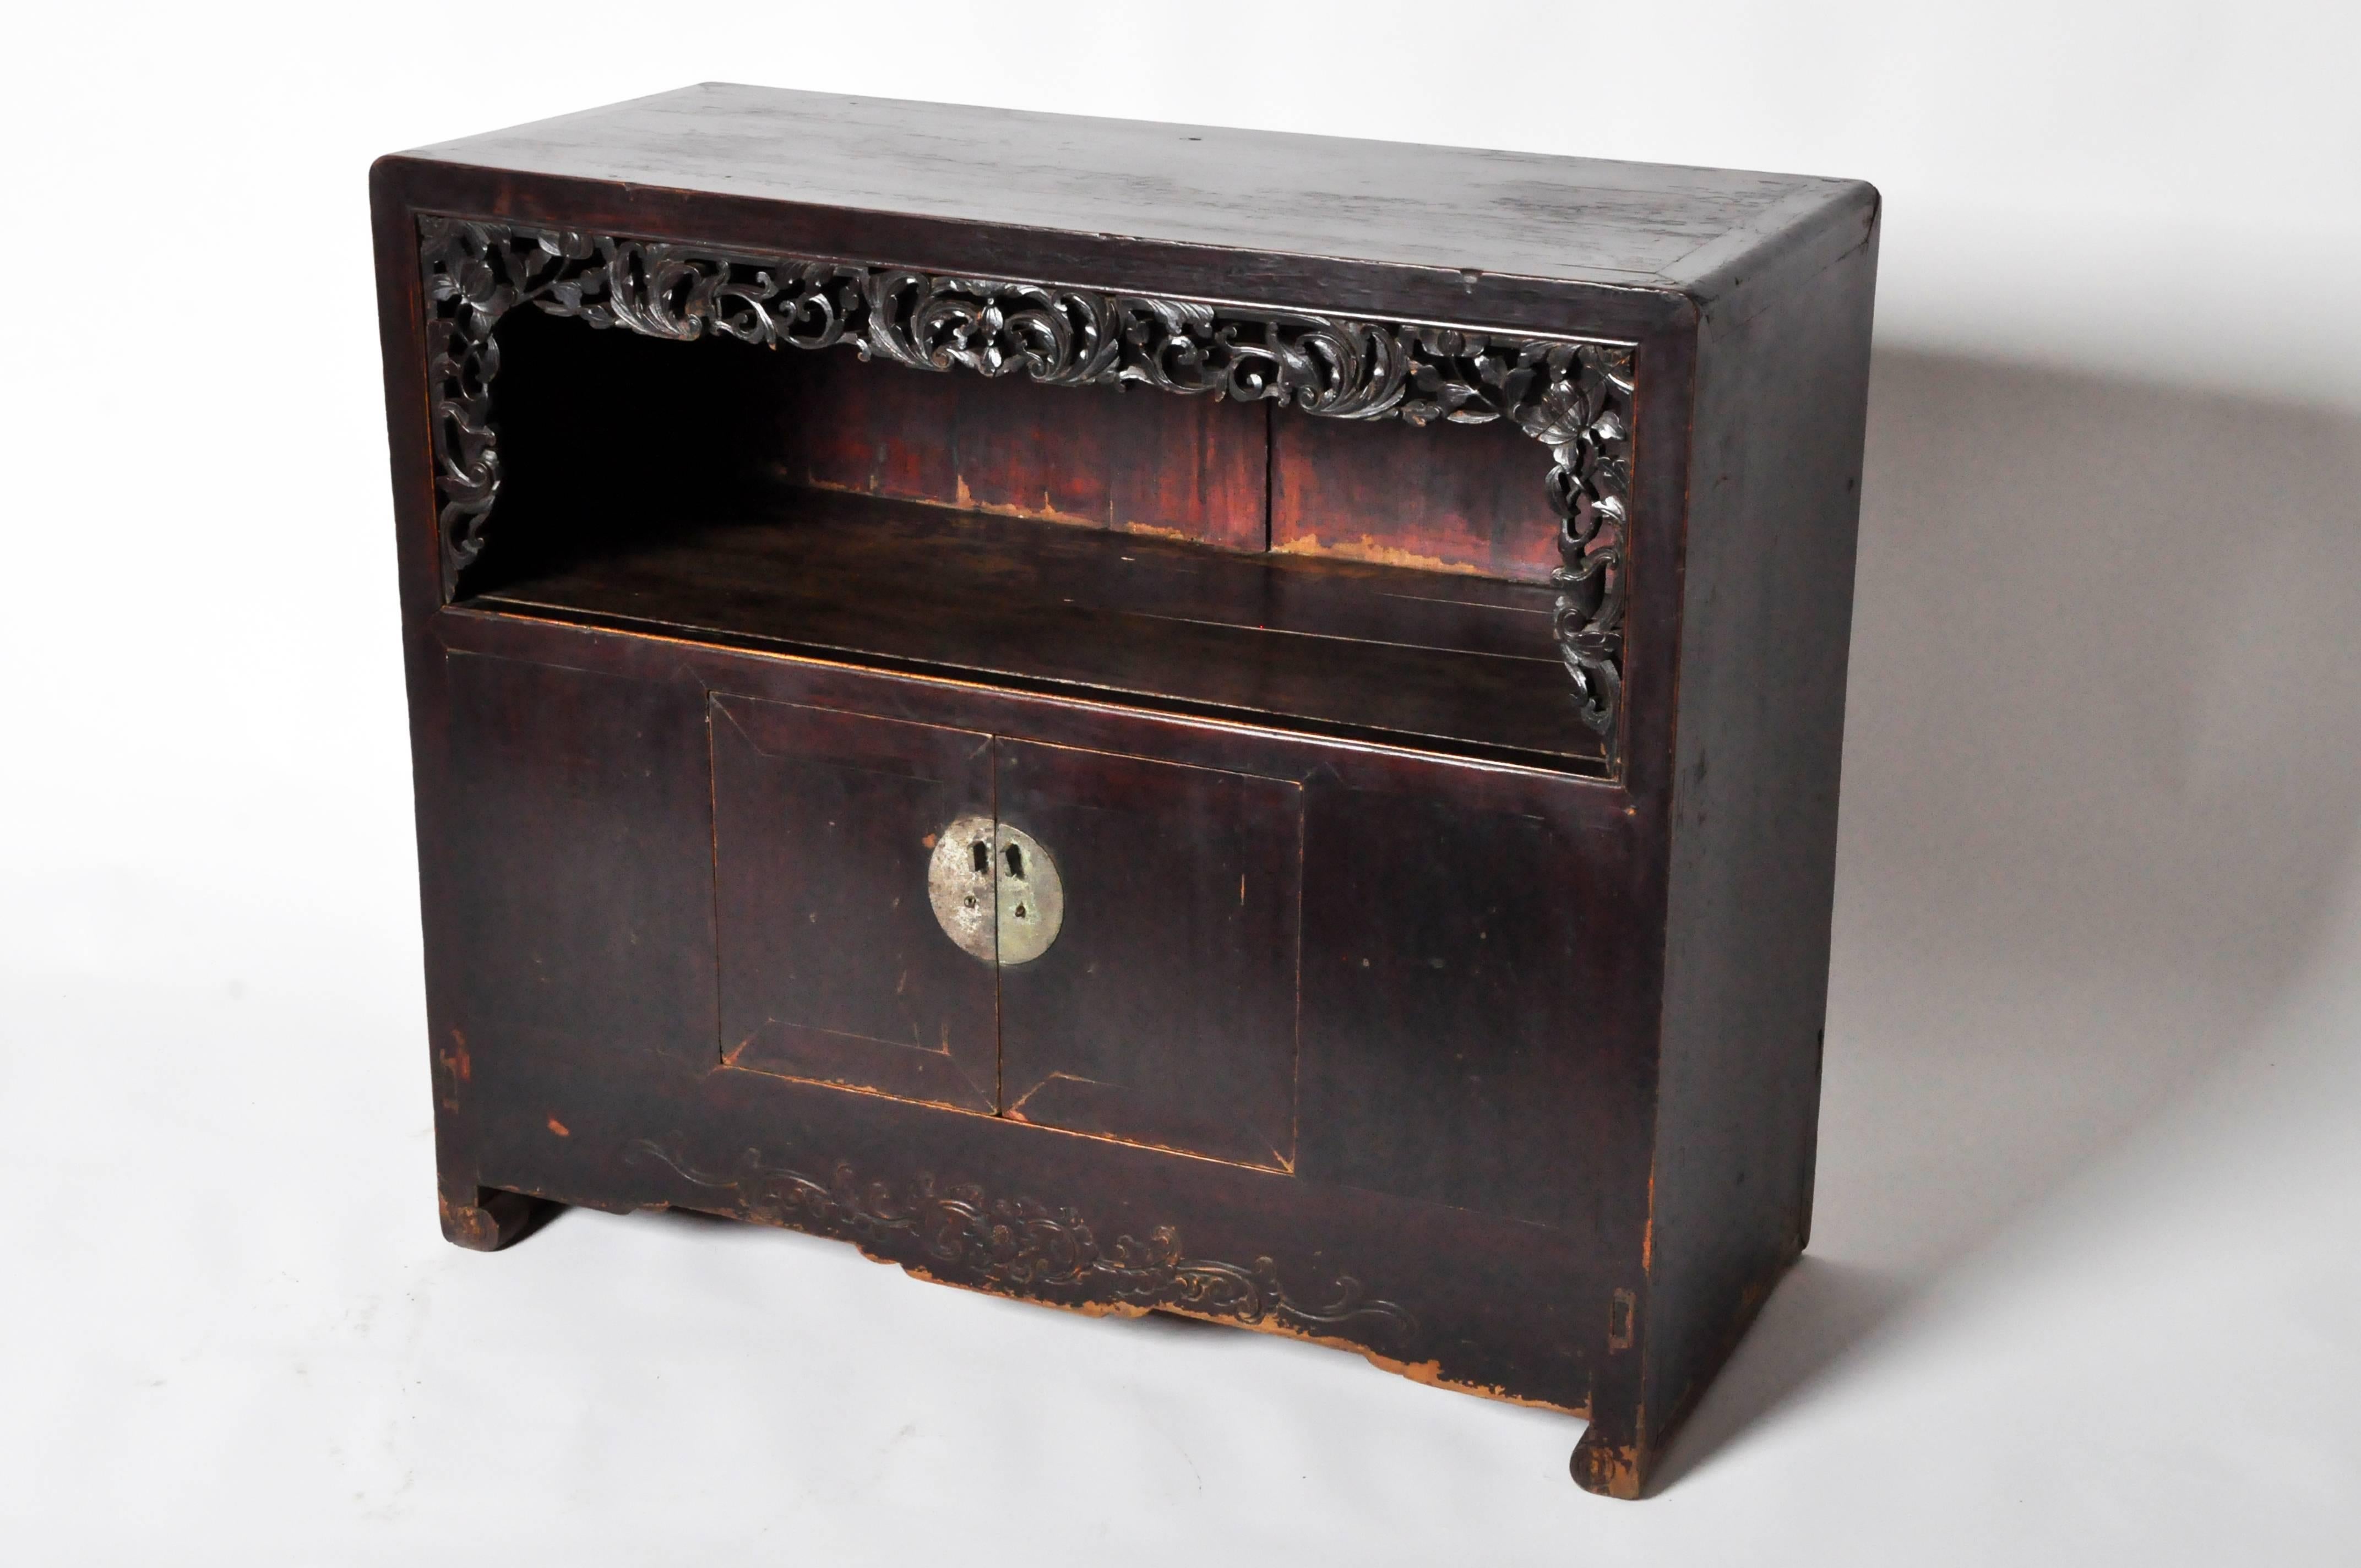 This hybrid features rounded edges on the top board, which frame a display case with an openwork foliage motif carved apron. Below the display shelf are two small doors with a circular lockplate. The foliage motif carved in relief continues at the